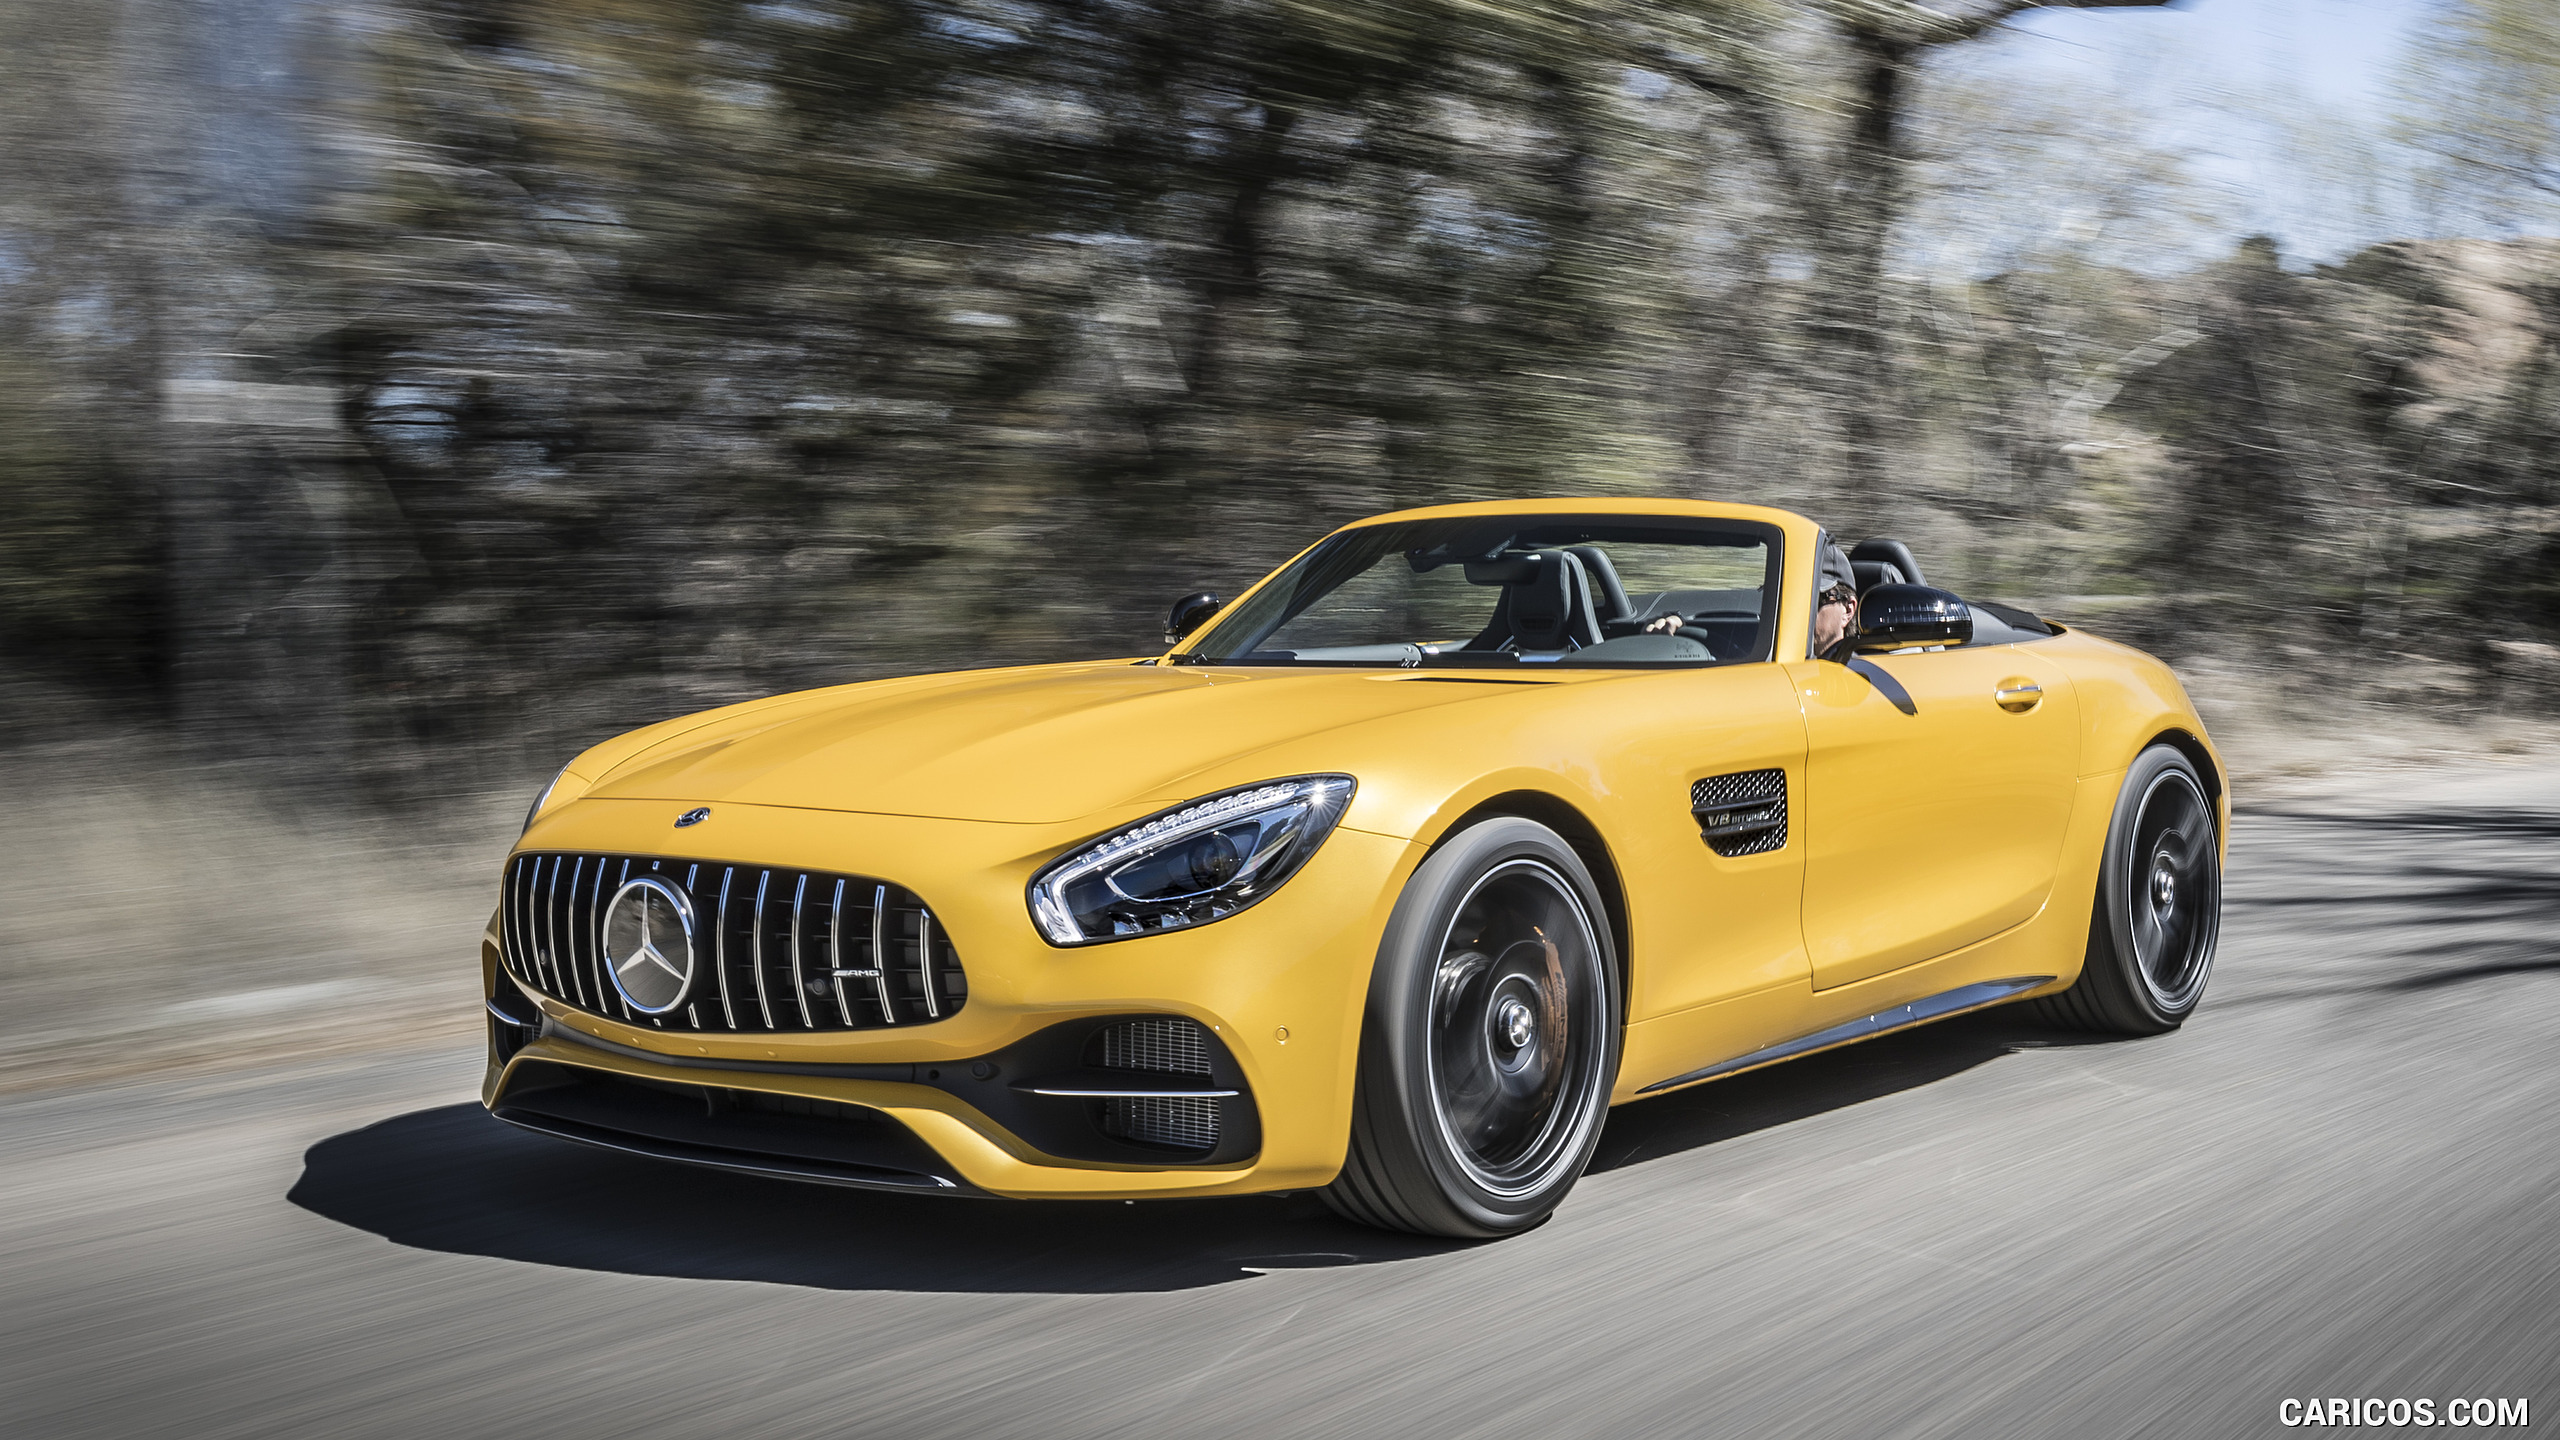 2018 Mercedes-AMG GT C Roadster - Front Three-Quarter, #187 of 350